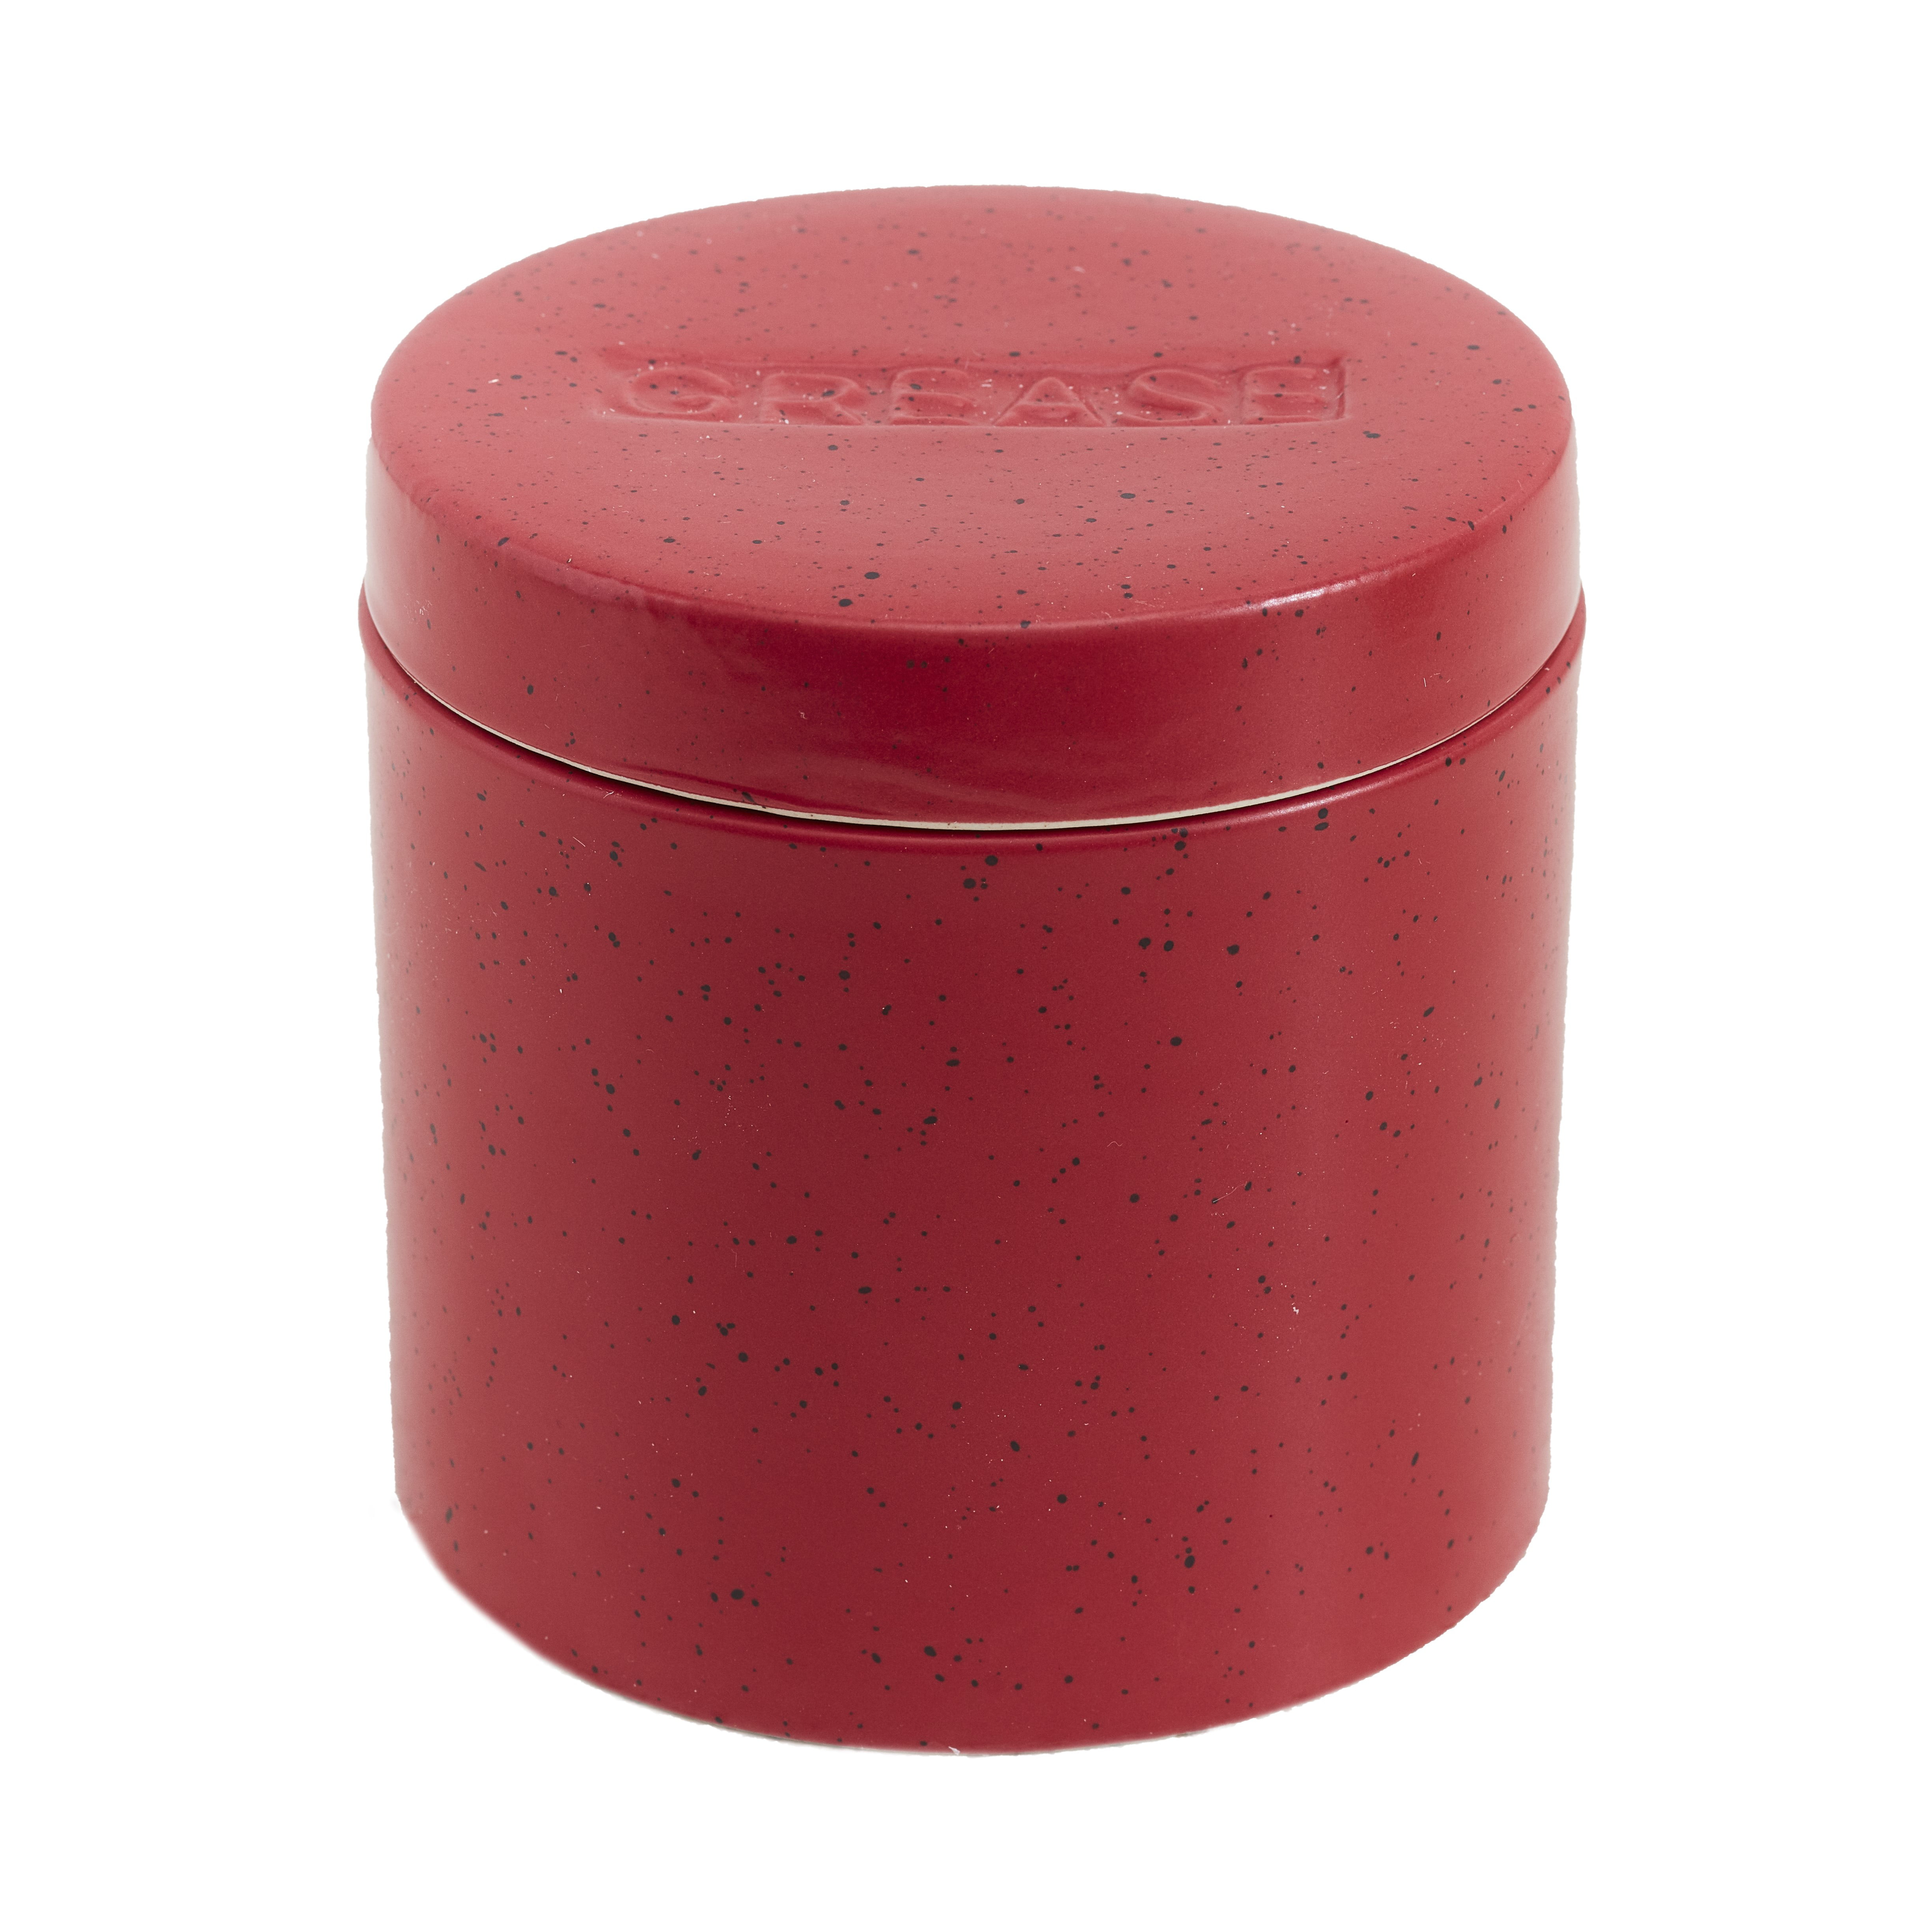 Senmubery Bacon Grease Container with Filter to Store Grease and Oil-Silicone-Free BPA Can Hold a Cup 